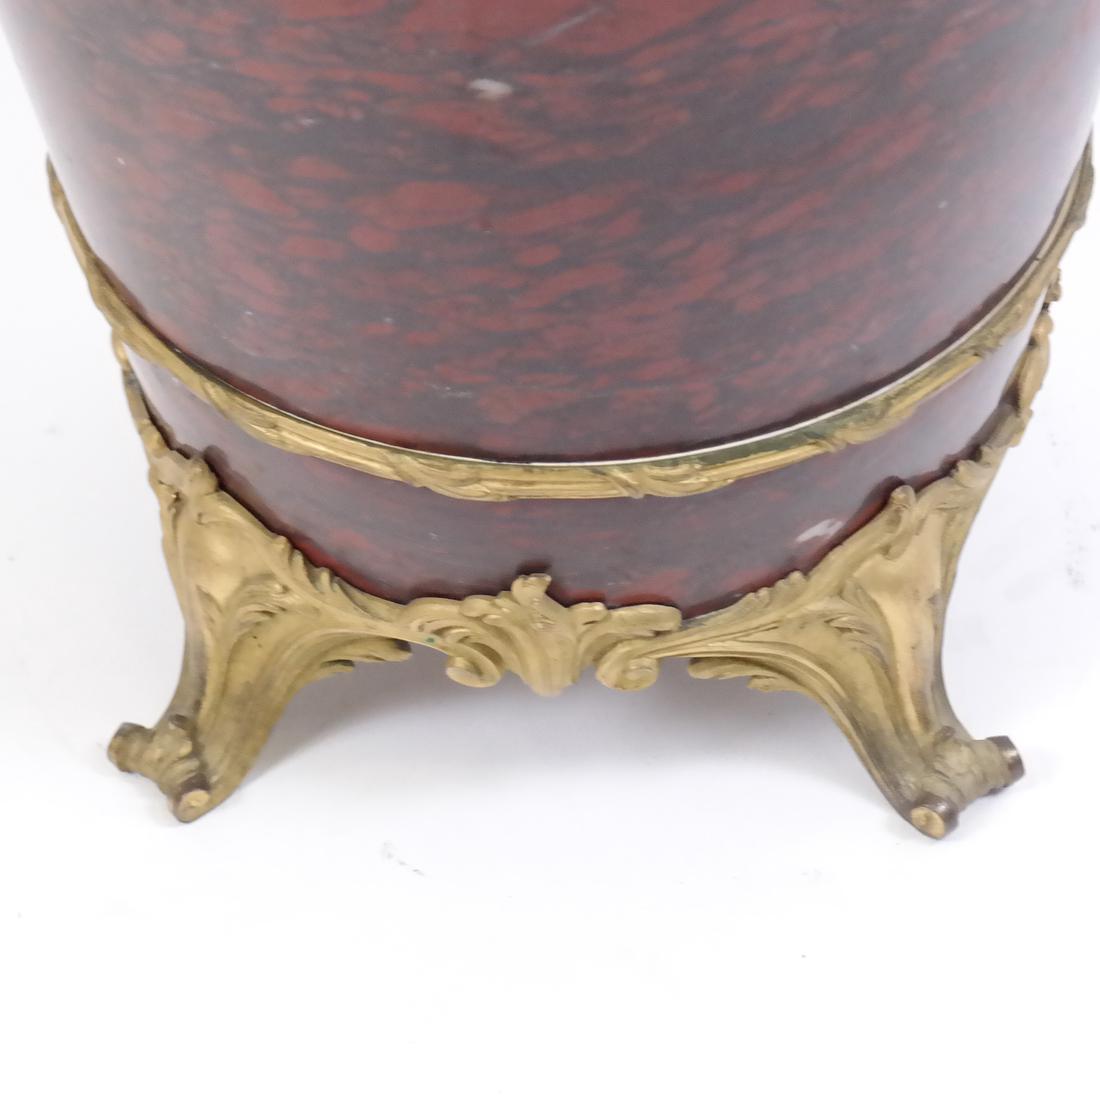 20th Century Monumental Gilt Bronze Mounted Rouge Marble Planter Centerpiece For Sale 2